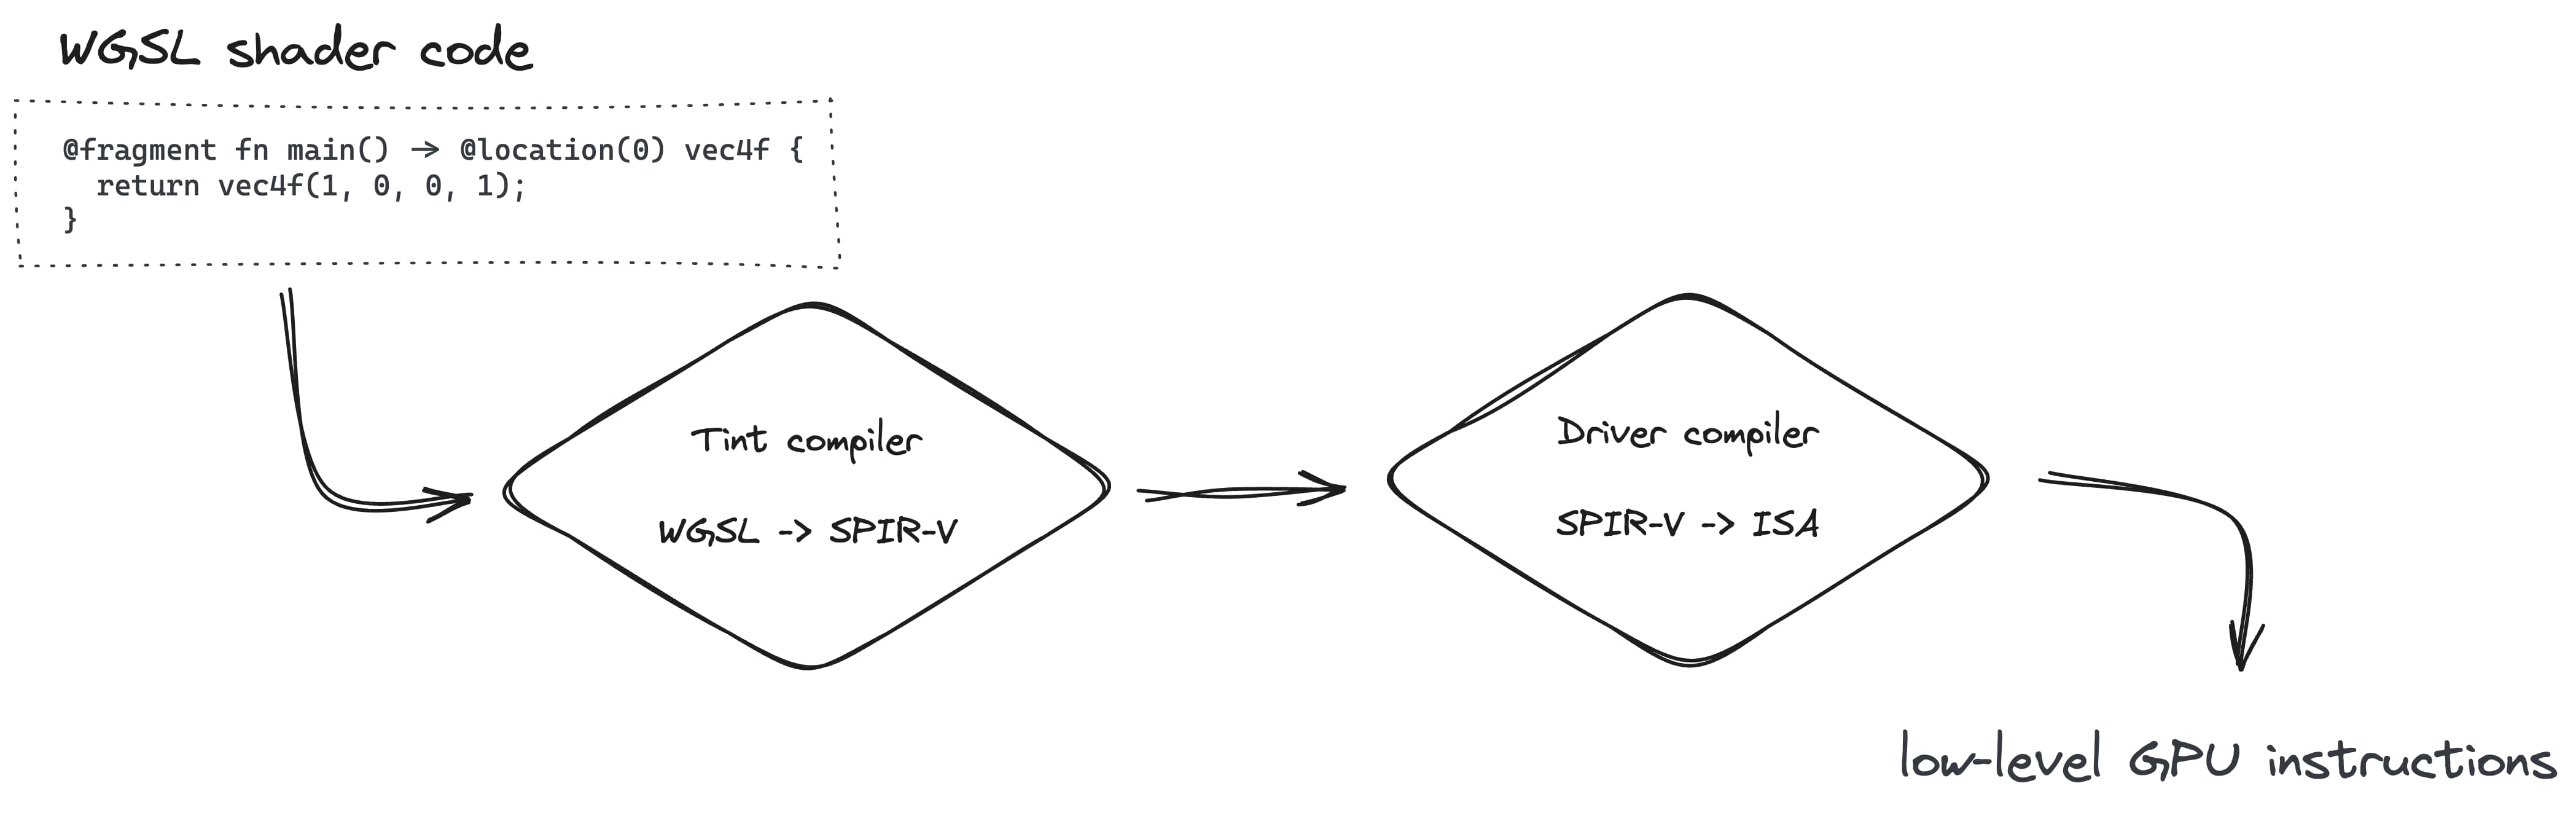 Render pipeline creation involves converting WGSL to SPIR-V with the Tint compiler, then to ISA with the Driver compiler.